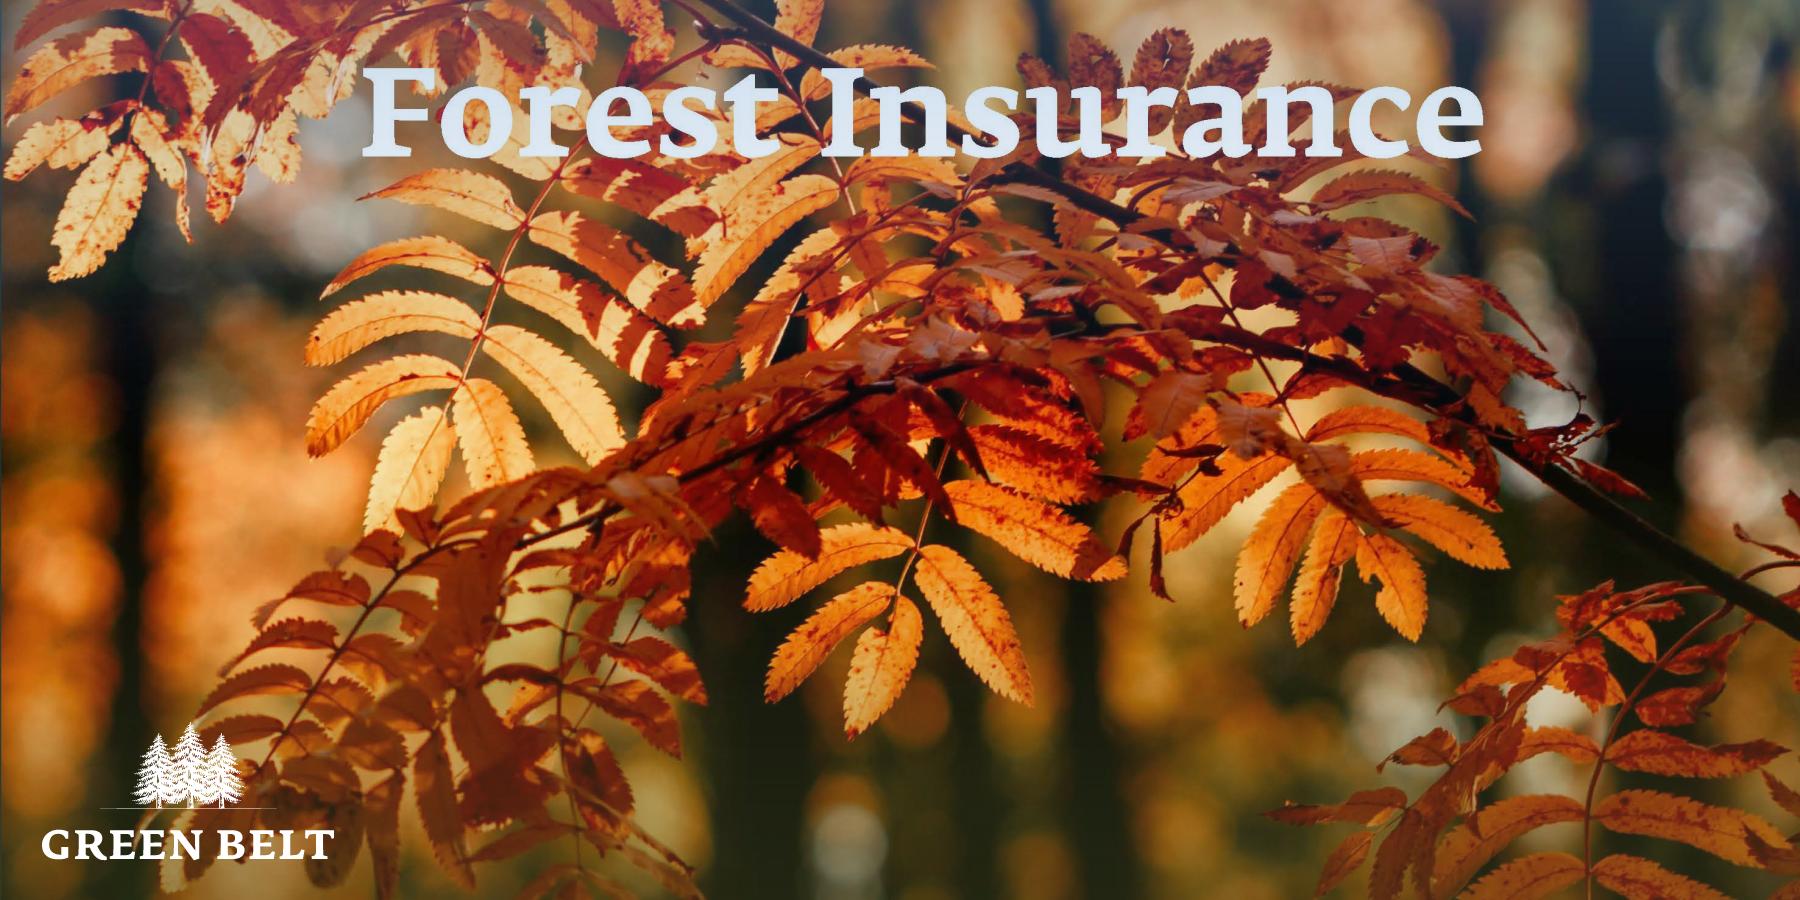 Forestry Insurance 